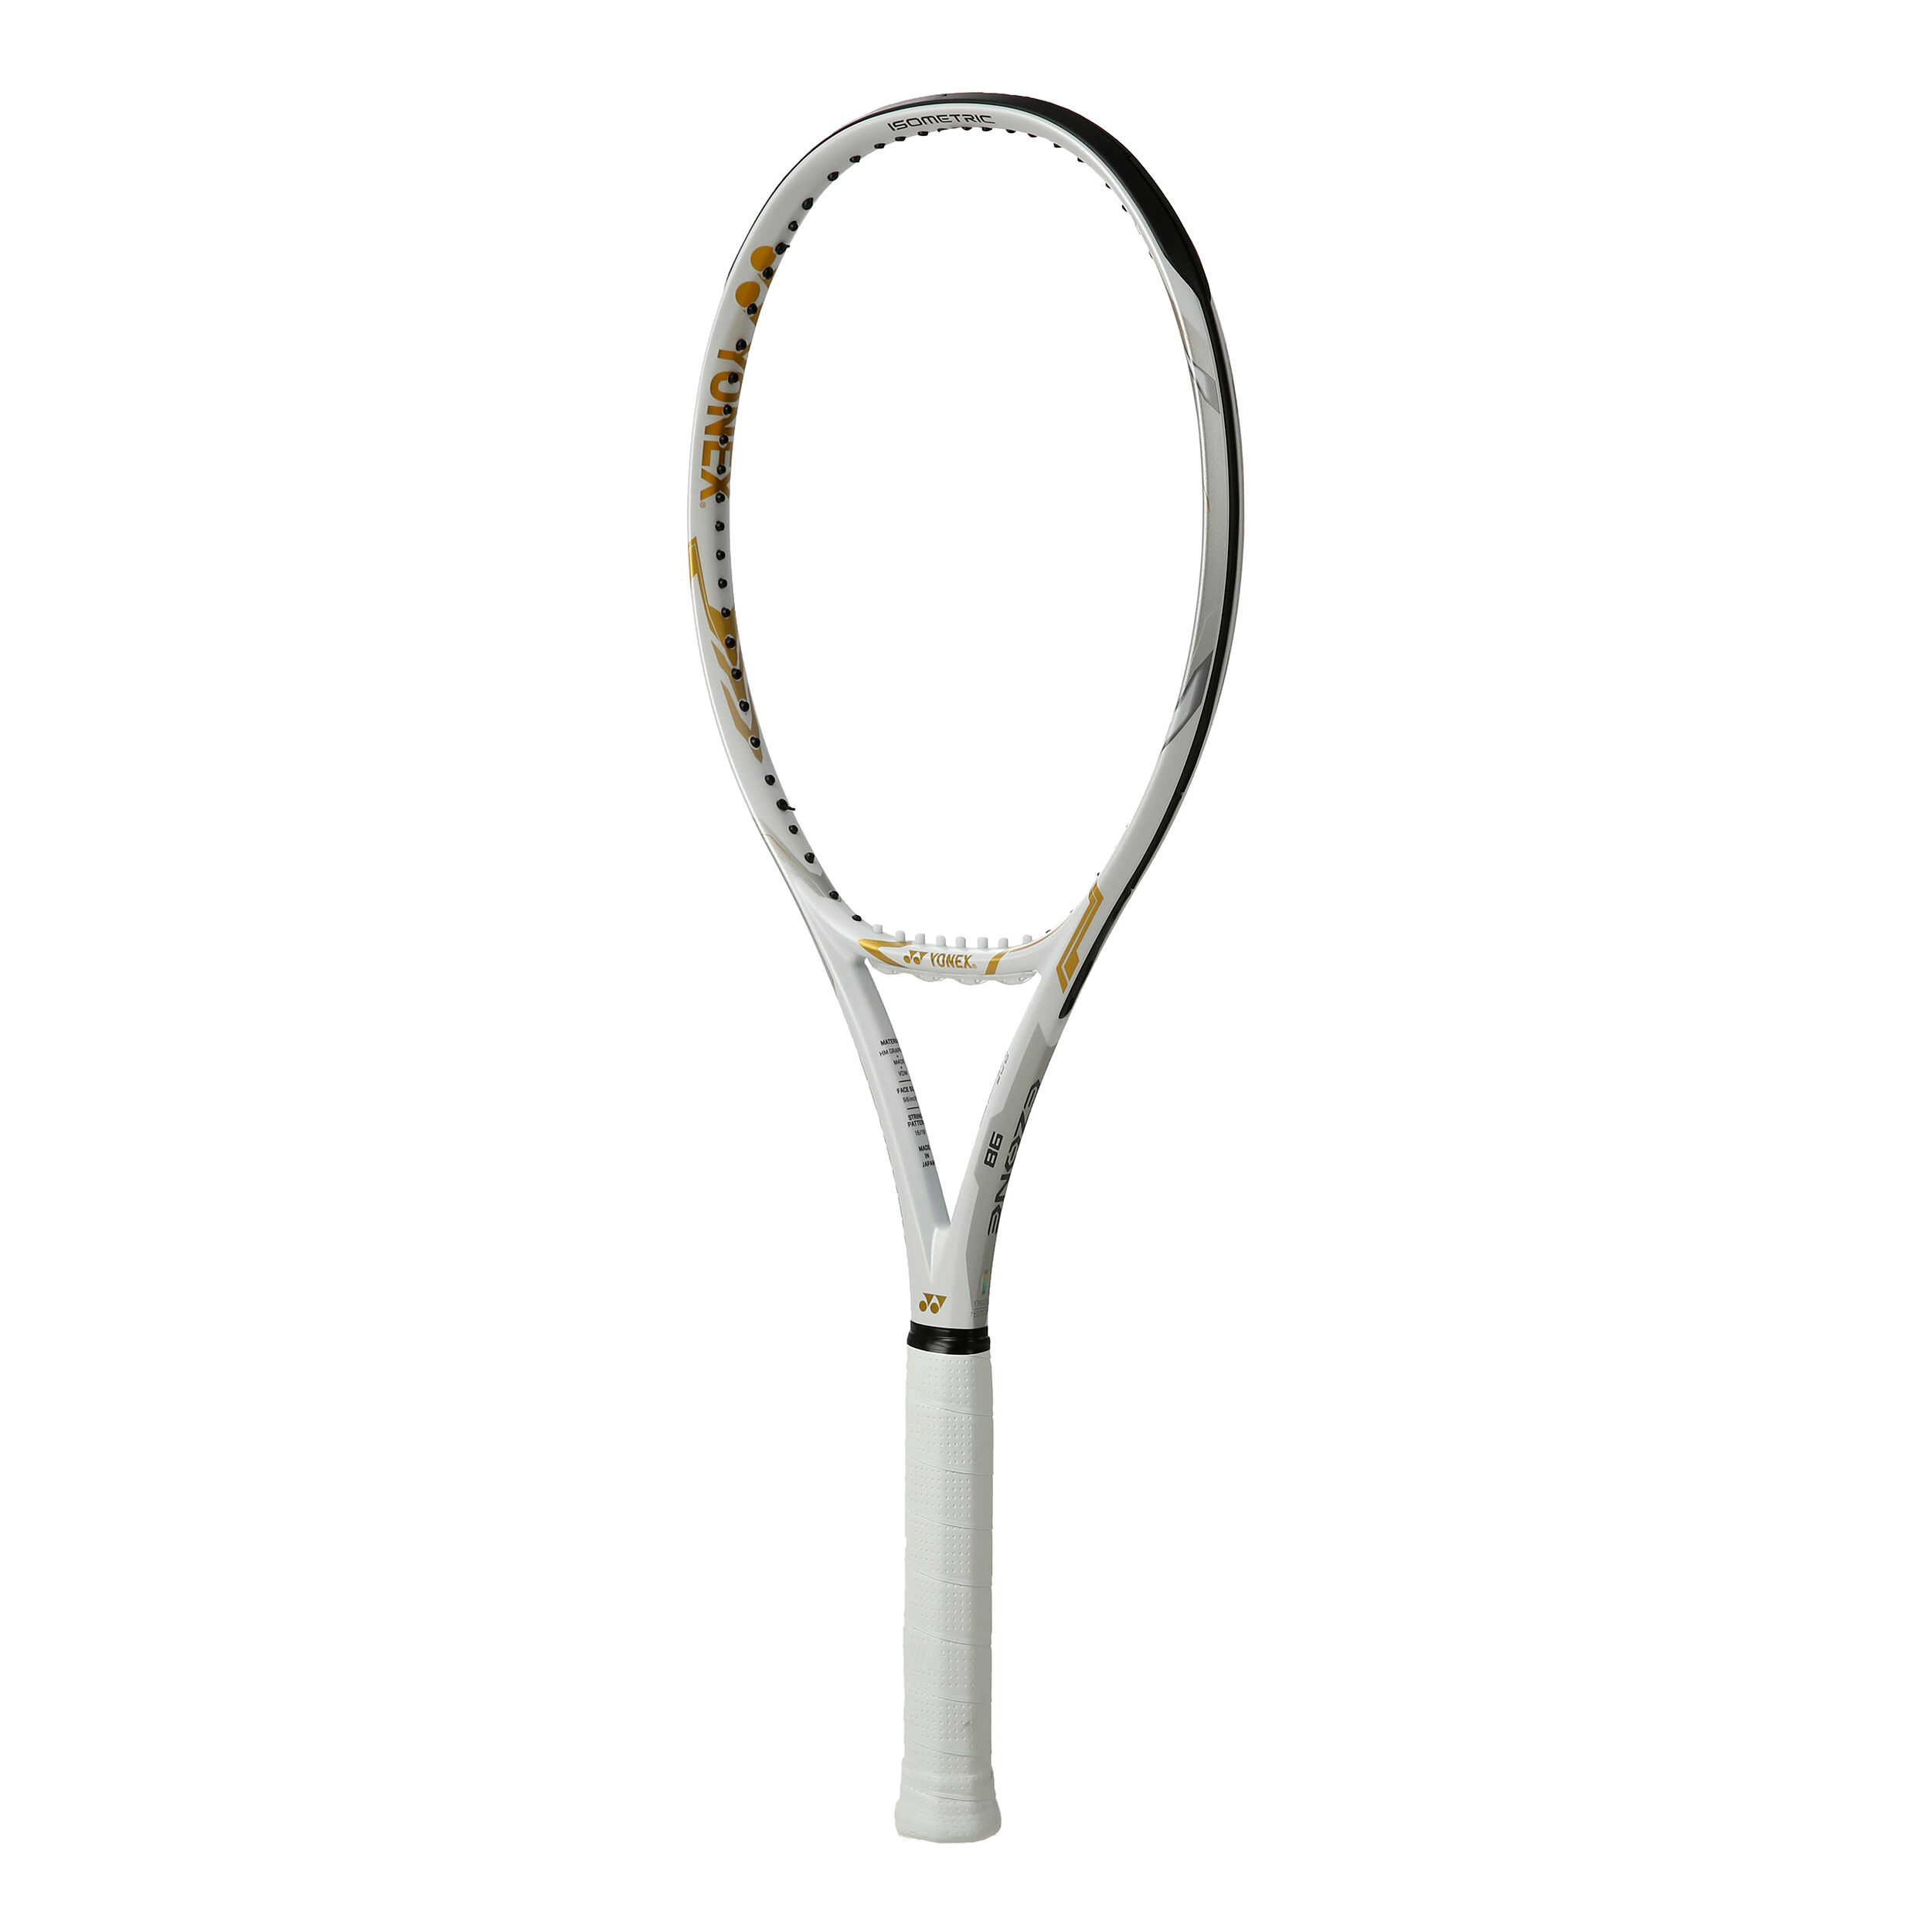 buy Yonex EZONE 98 305g (Limited Edition) online | Tennis-Point